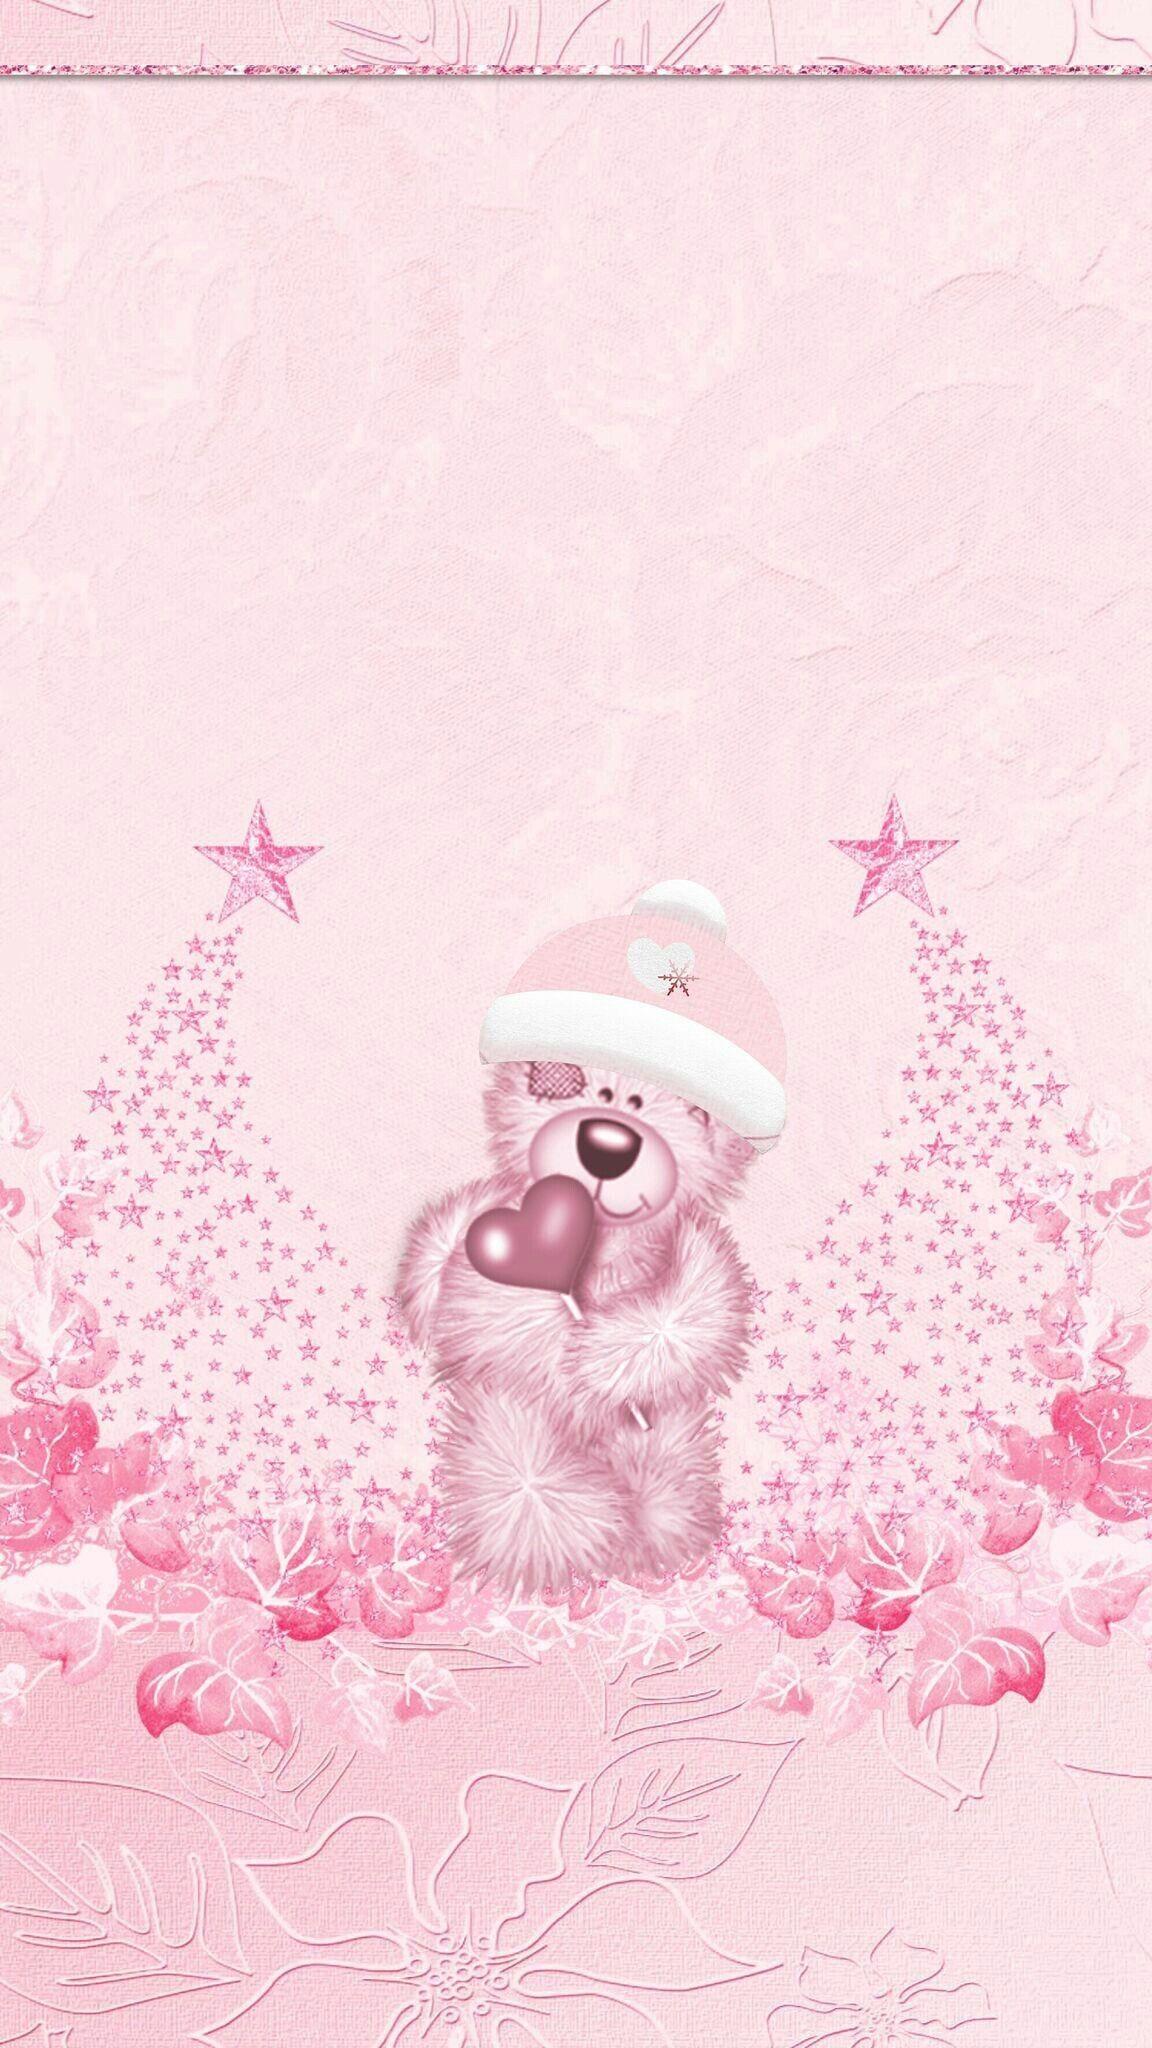 851186 Pink Christmas Background Images Stock Photos  Vectors   Shutterstock